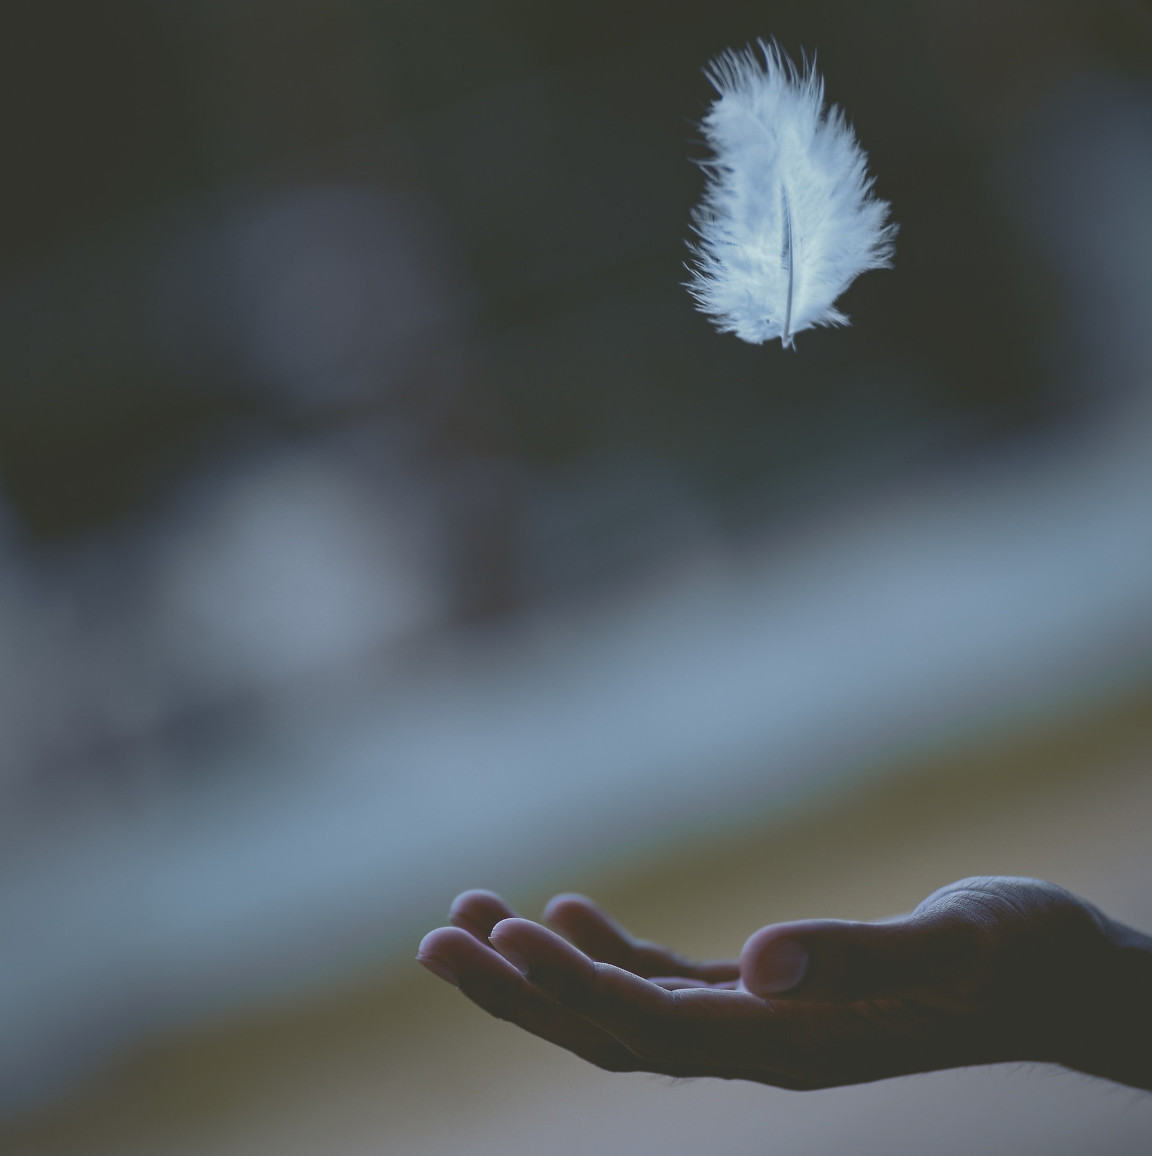 Catching a feather in an outstretched hand.